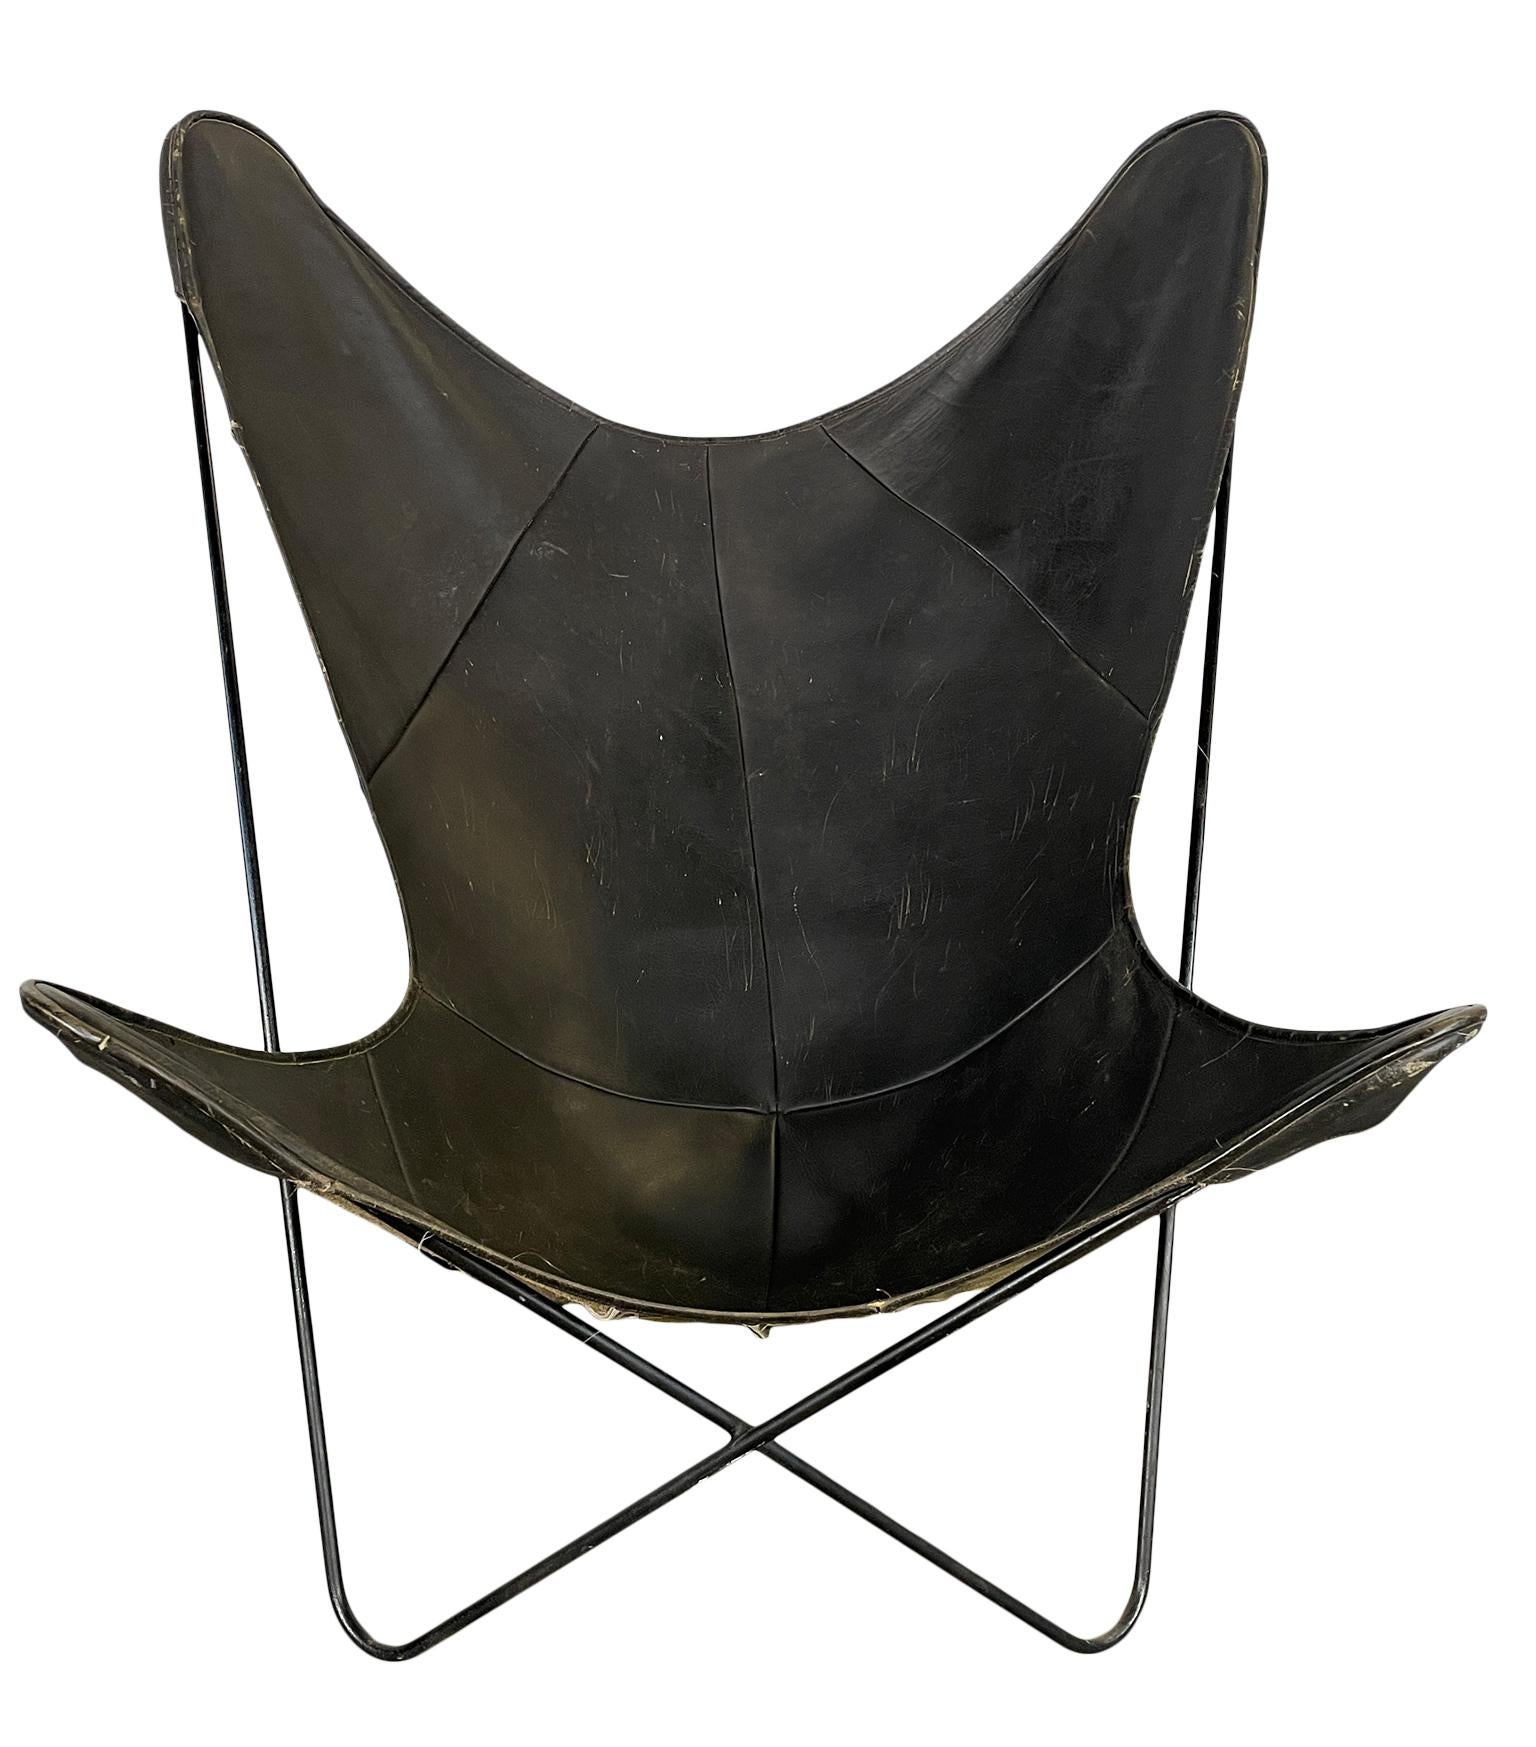 Original mid-century black Iron leather butterfly chair beautiful Patina. All original chair the leather shows wear use some scuffs but overall beautiful condition and 100% structural. Very delicate design. Located in Brooklyn NYC.